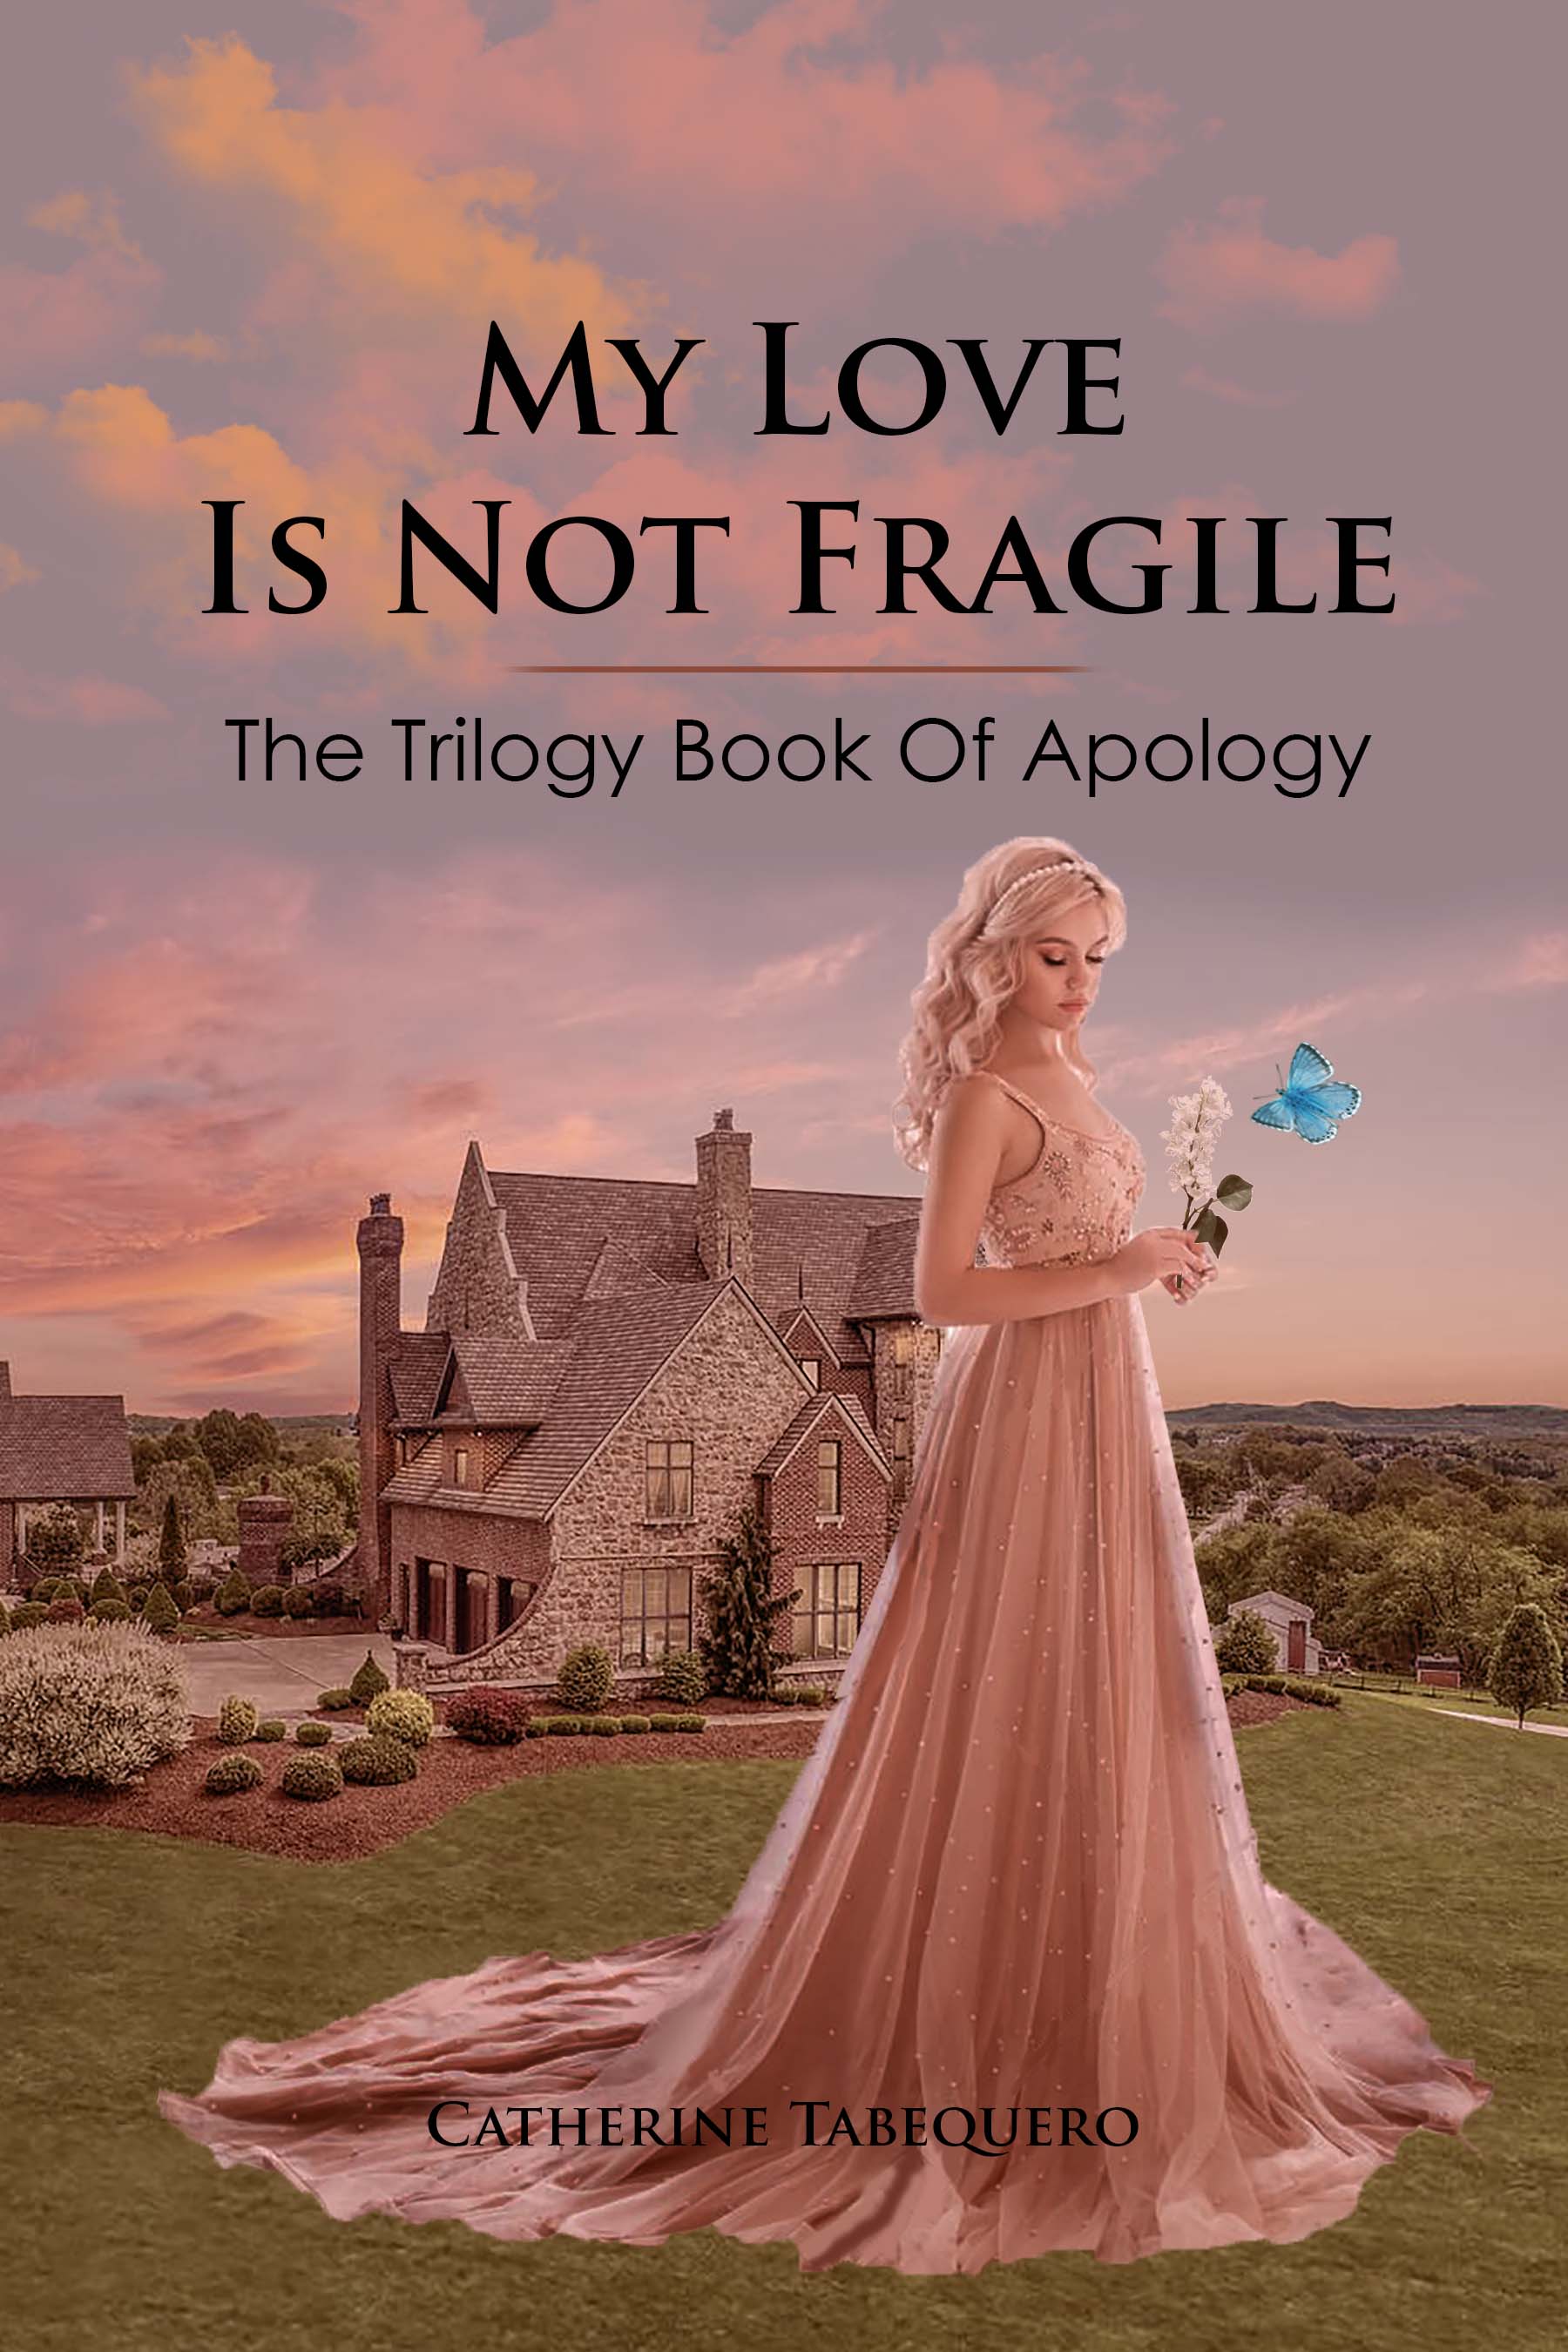 My Love is Not Fragile (The Trilogy Book of Apology)